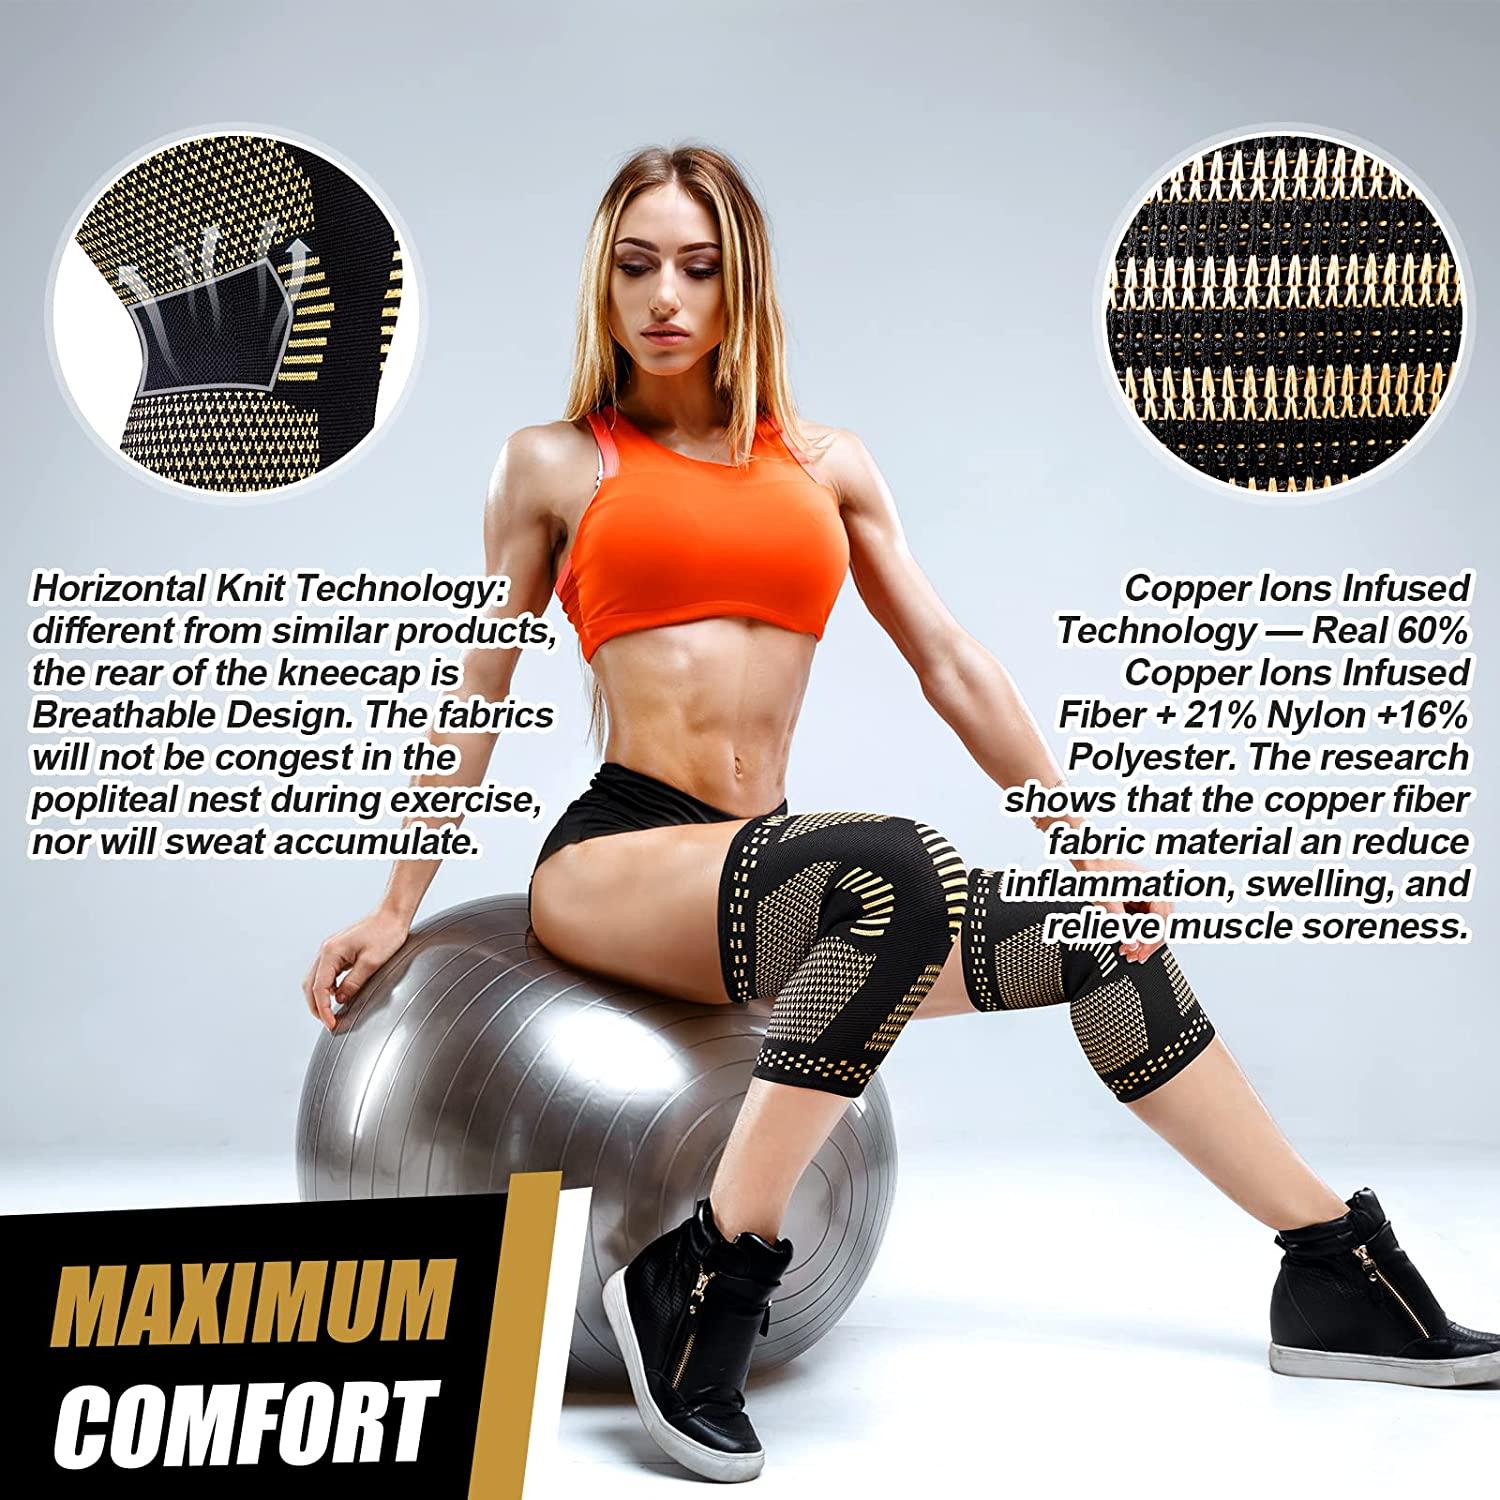 NEENCA Copper Knee Sleeves (Pair), Professional Knee Brace with Copper Ions  Infused Fiber Technology, Premium Compression Support for Knee Pain